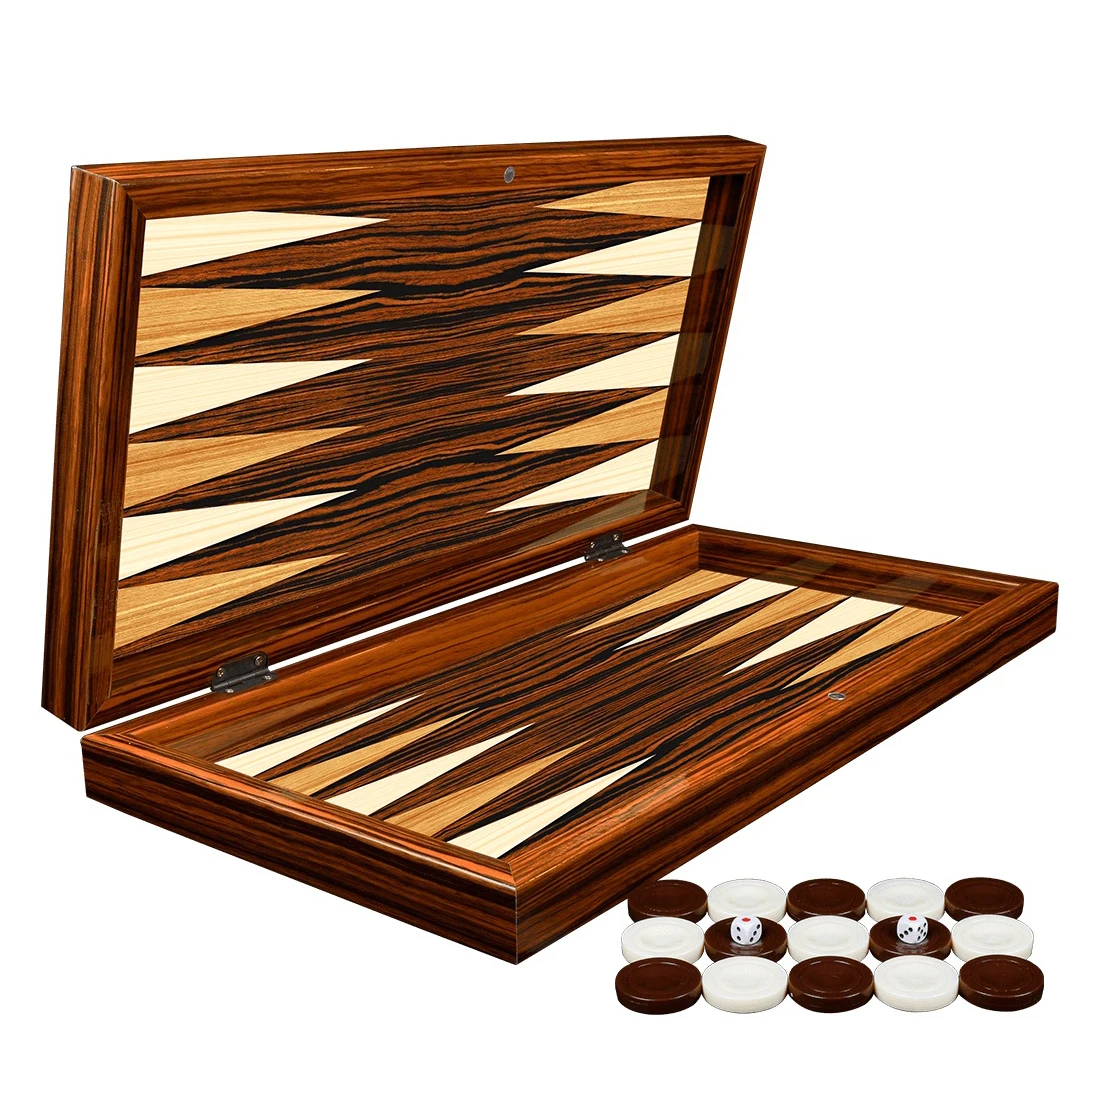 Premium Backgammon Board Set Family Games Wood With Chips Checkers Dices Stamp Entertainment Tiles For Adult Gift